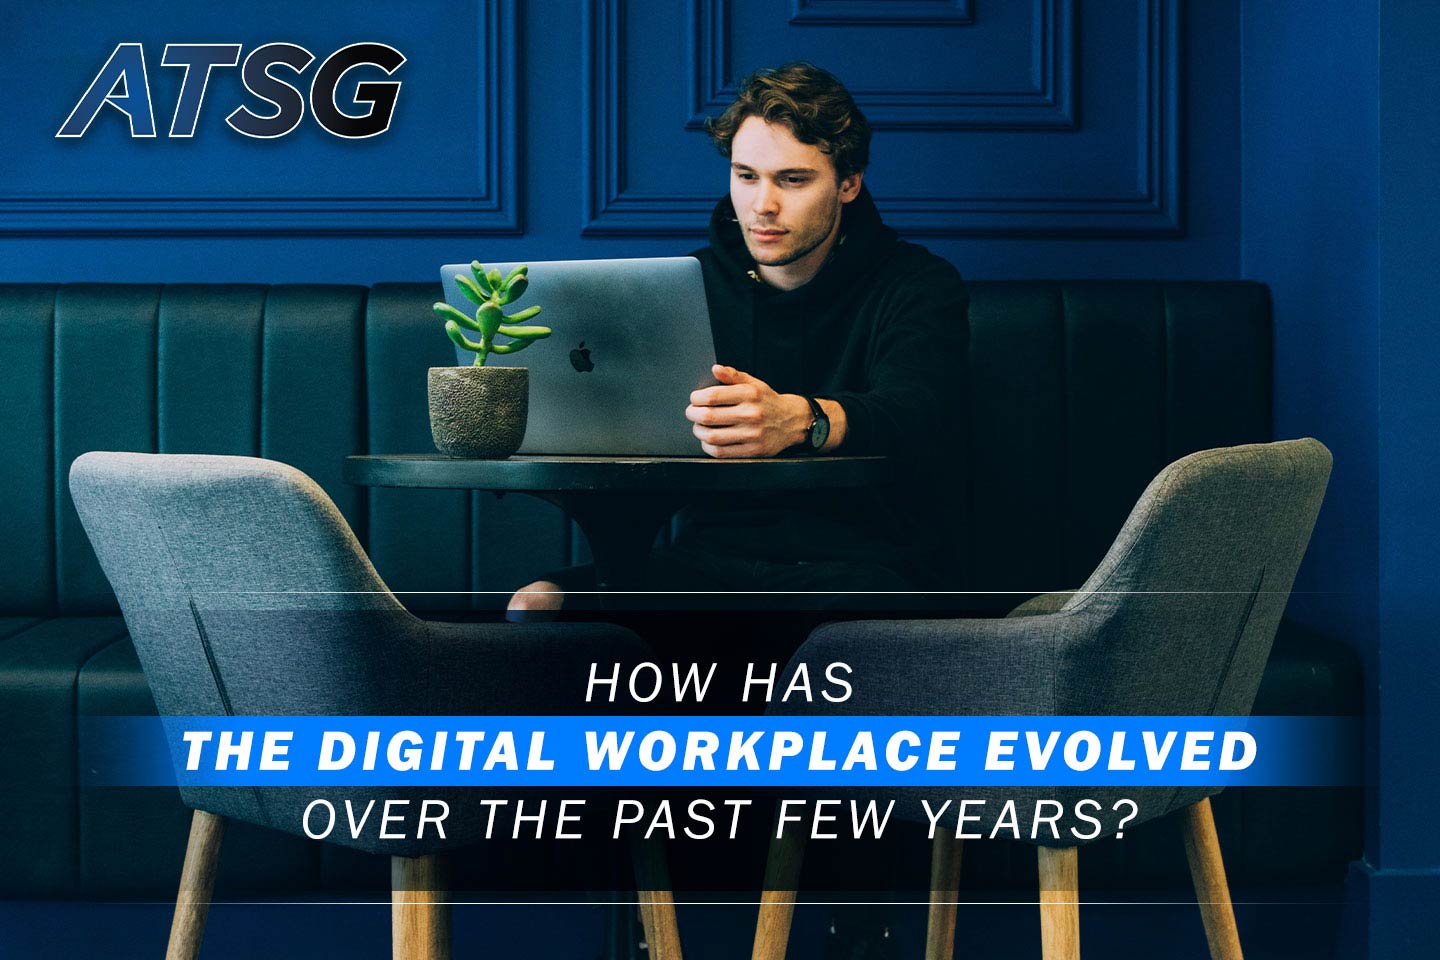 How-Has-the-Digital-Workplace-Evolved-Over-the-Past-Few-Years-Feature